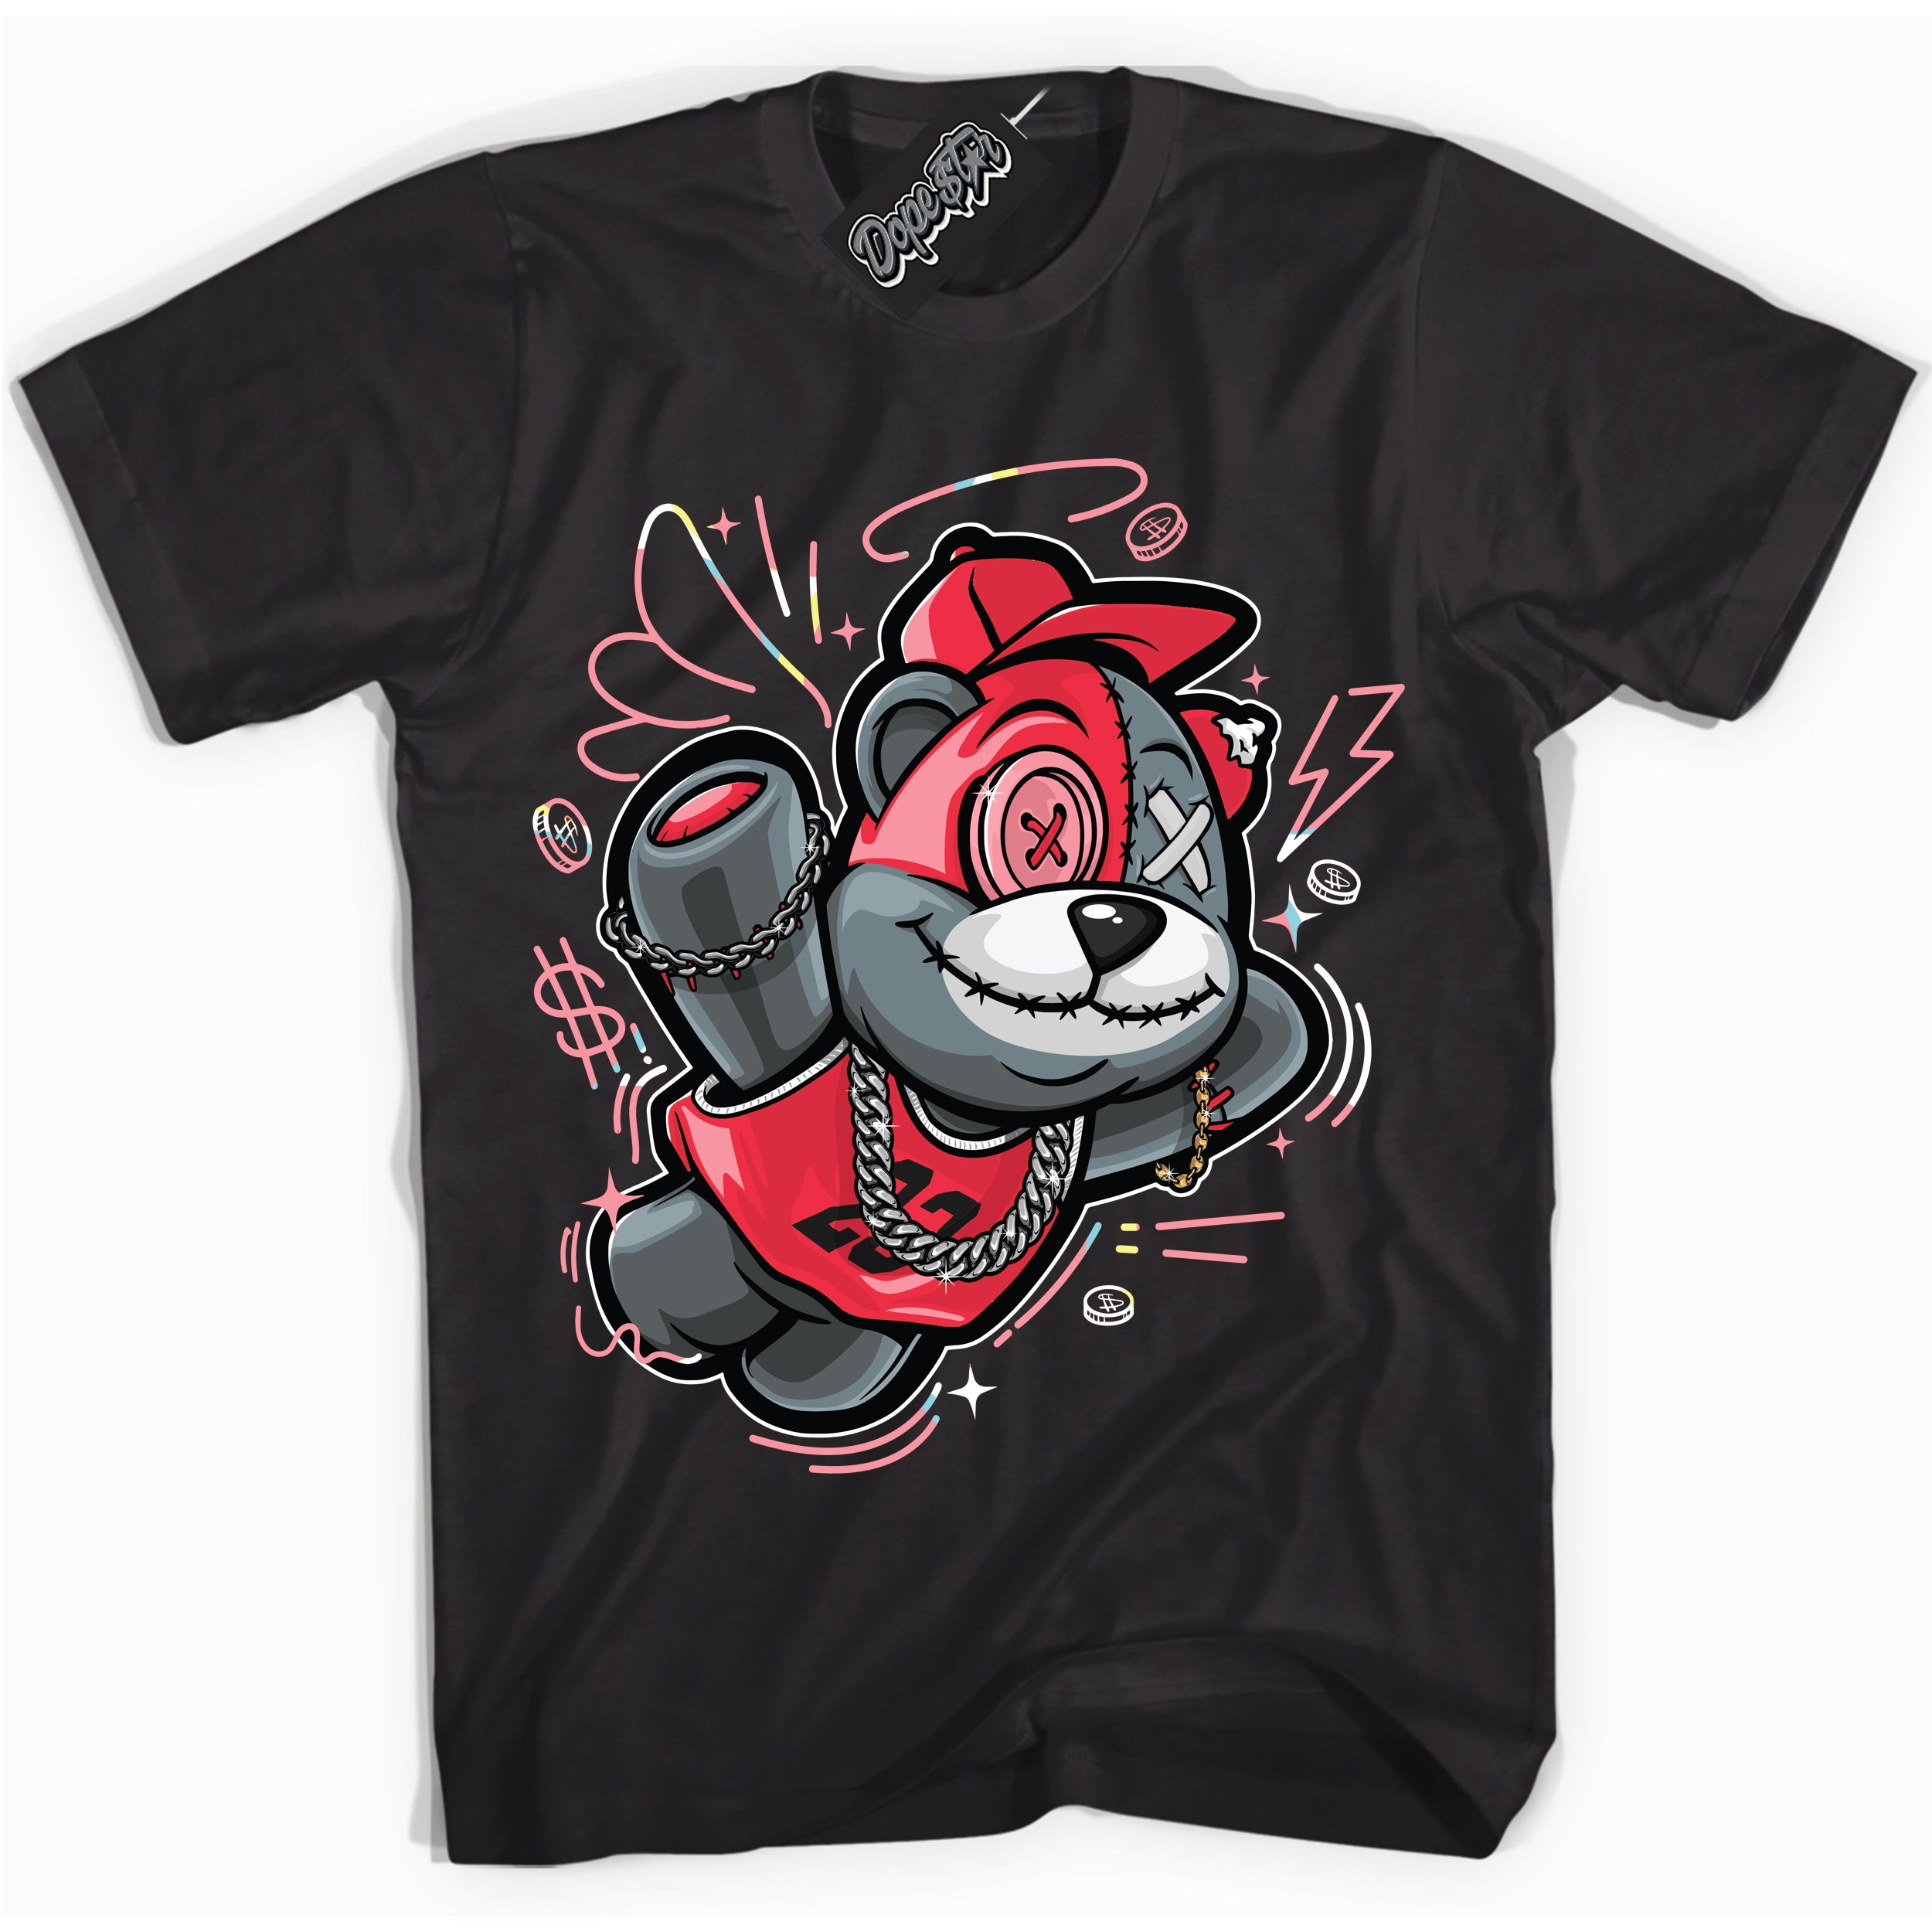 Cool Black graphic tee with “ Slam Dunk Bear ” design, that perfectly matches Spider-Verse 1s sneakers 